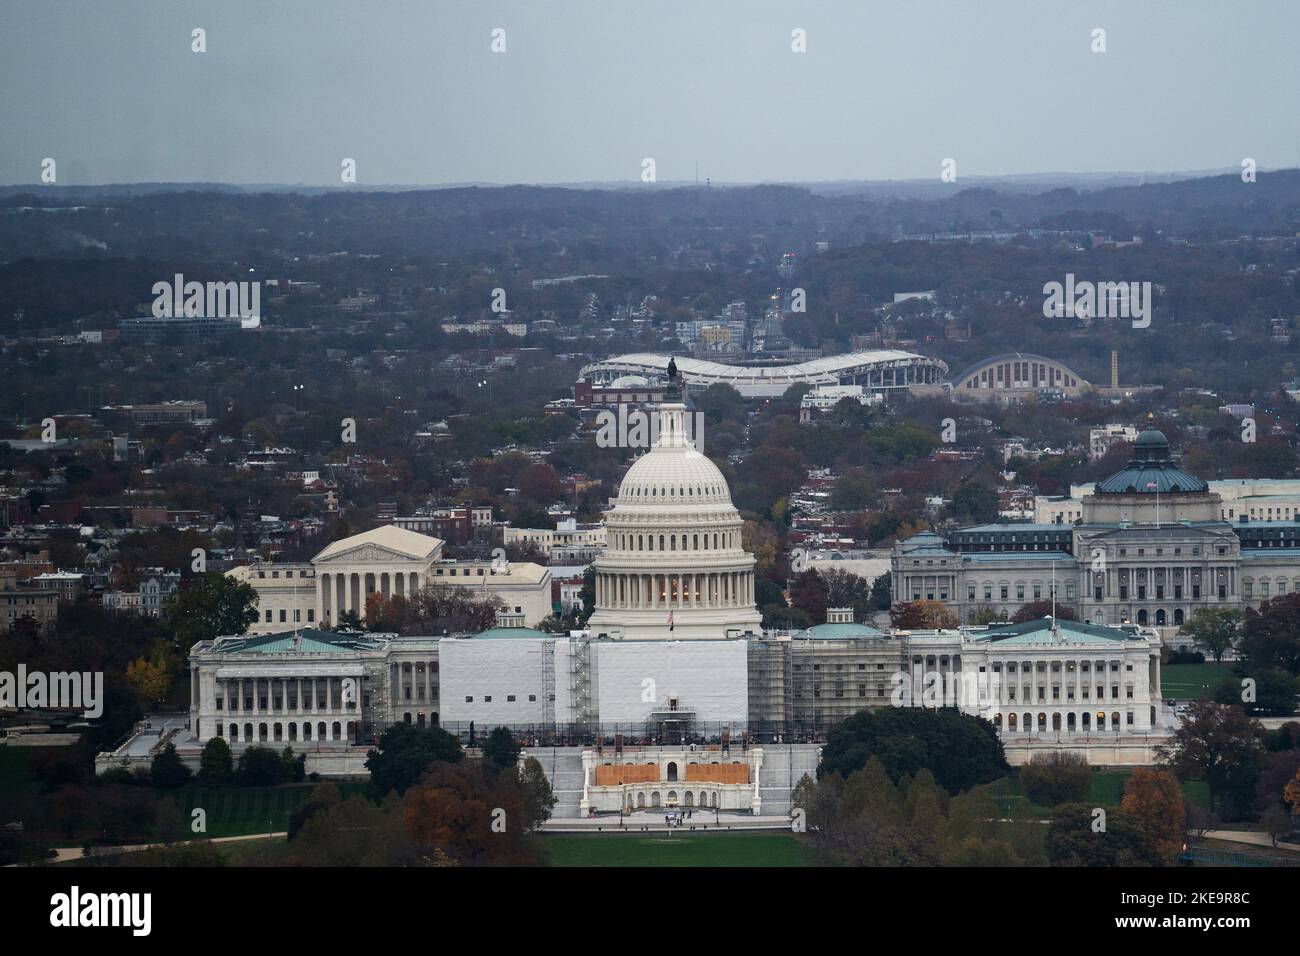 Washington, USA. 11th Nov, 2022. The U.S. Capitol building is seen in Washington, DC Nov. 10, 2022. The balance of power in the next U.S. Congress is still undecided as of late Thursday night, two days after the 2022 midterm elections. Credit: Liu Jie/Xinhua/Alamy Live News Stock Photo